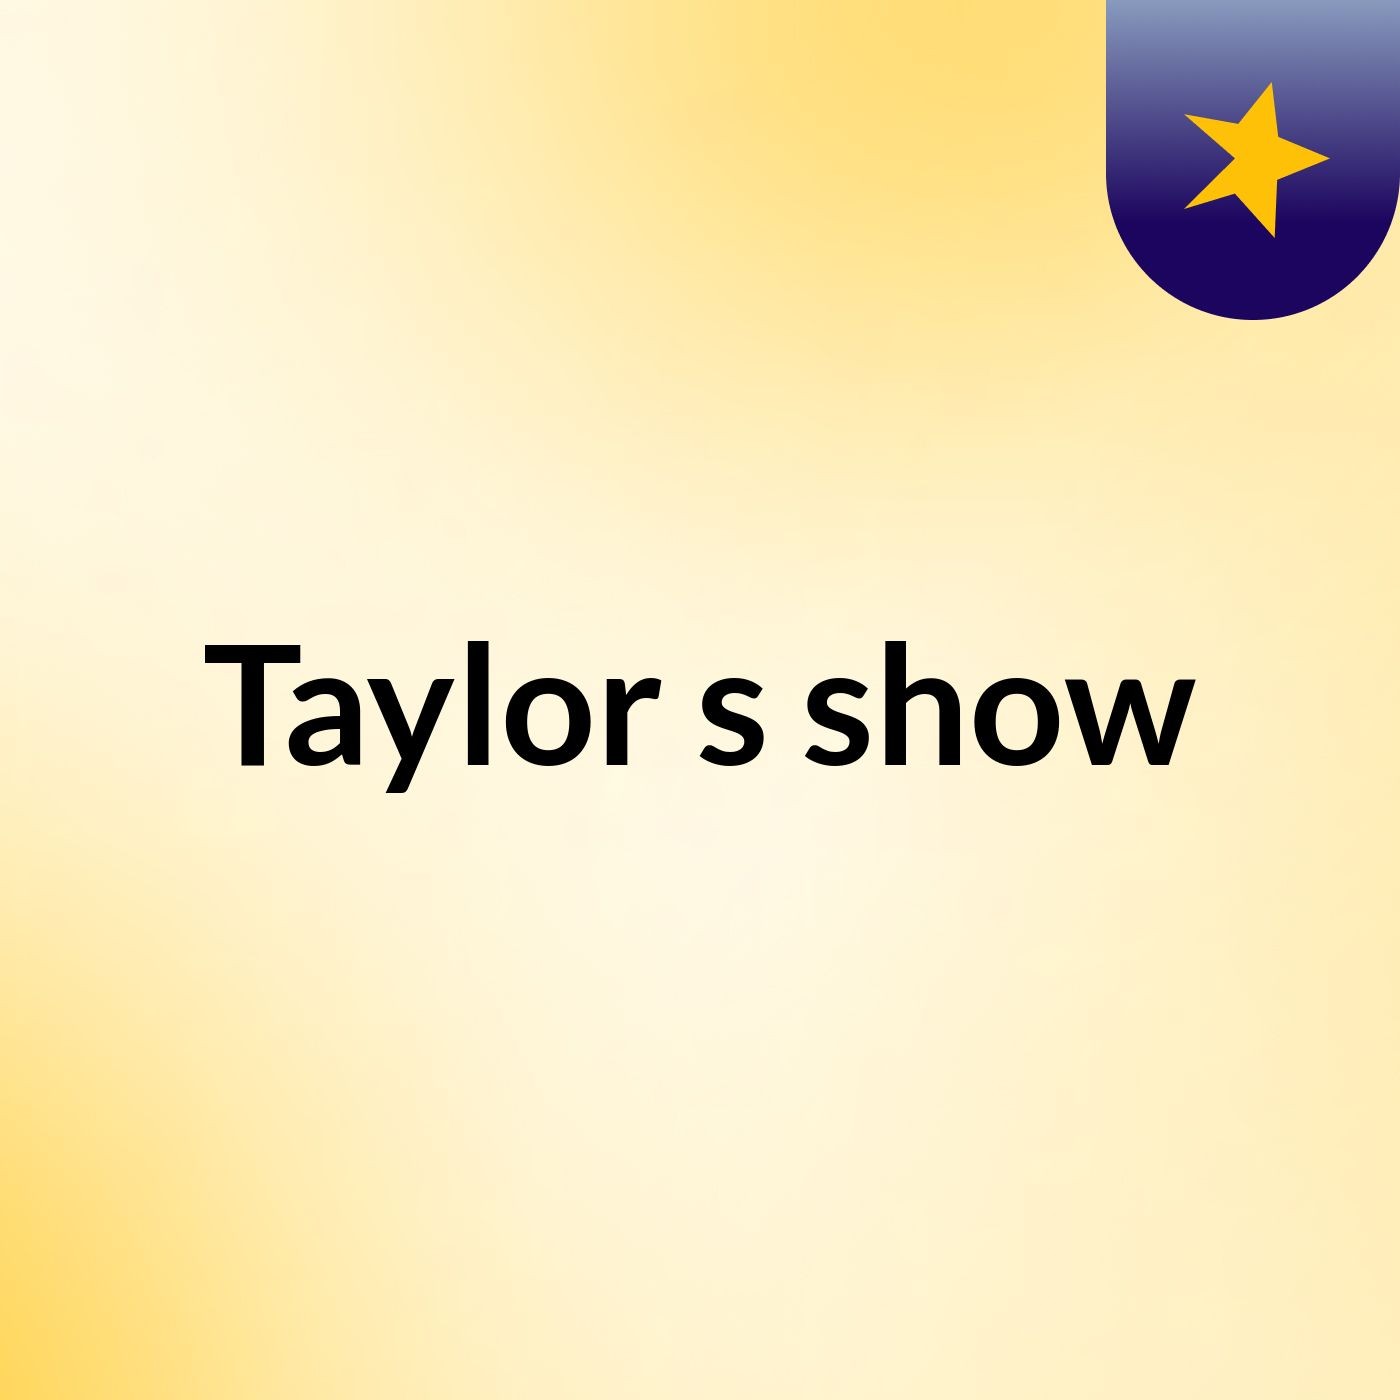 Taylor's show